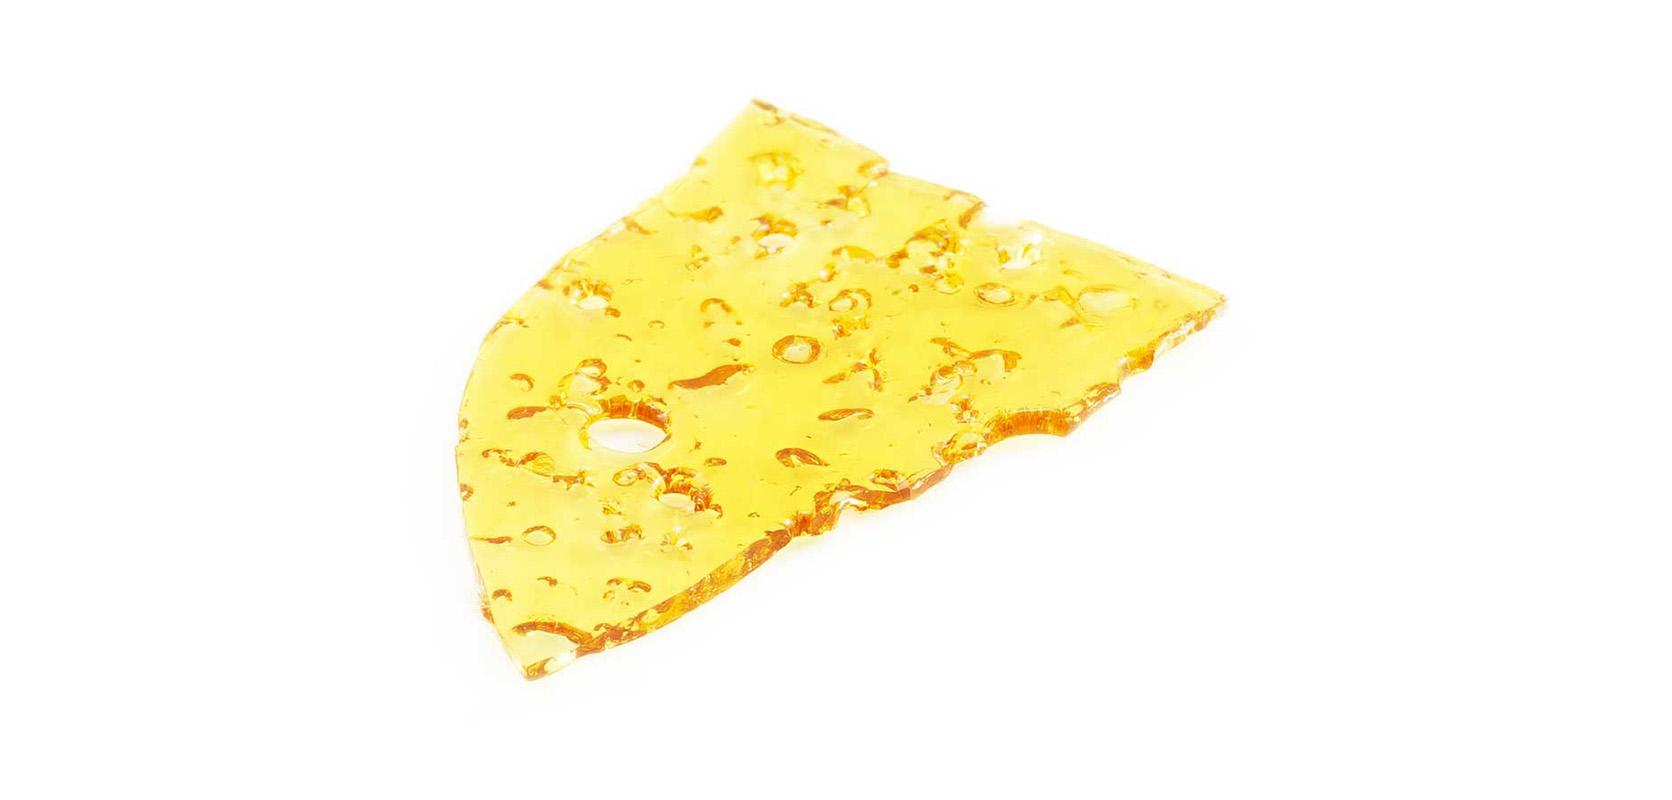 Death Bubba Shatter From So High Extracts. Cannabis concentrates dab drug shatter weed. Online dispensary Canada to buy weed online.